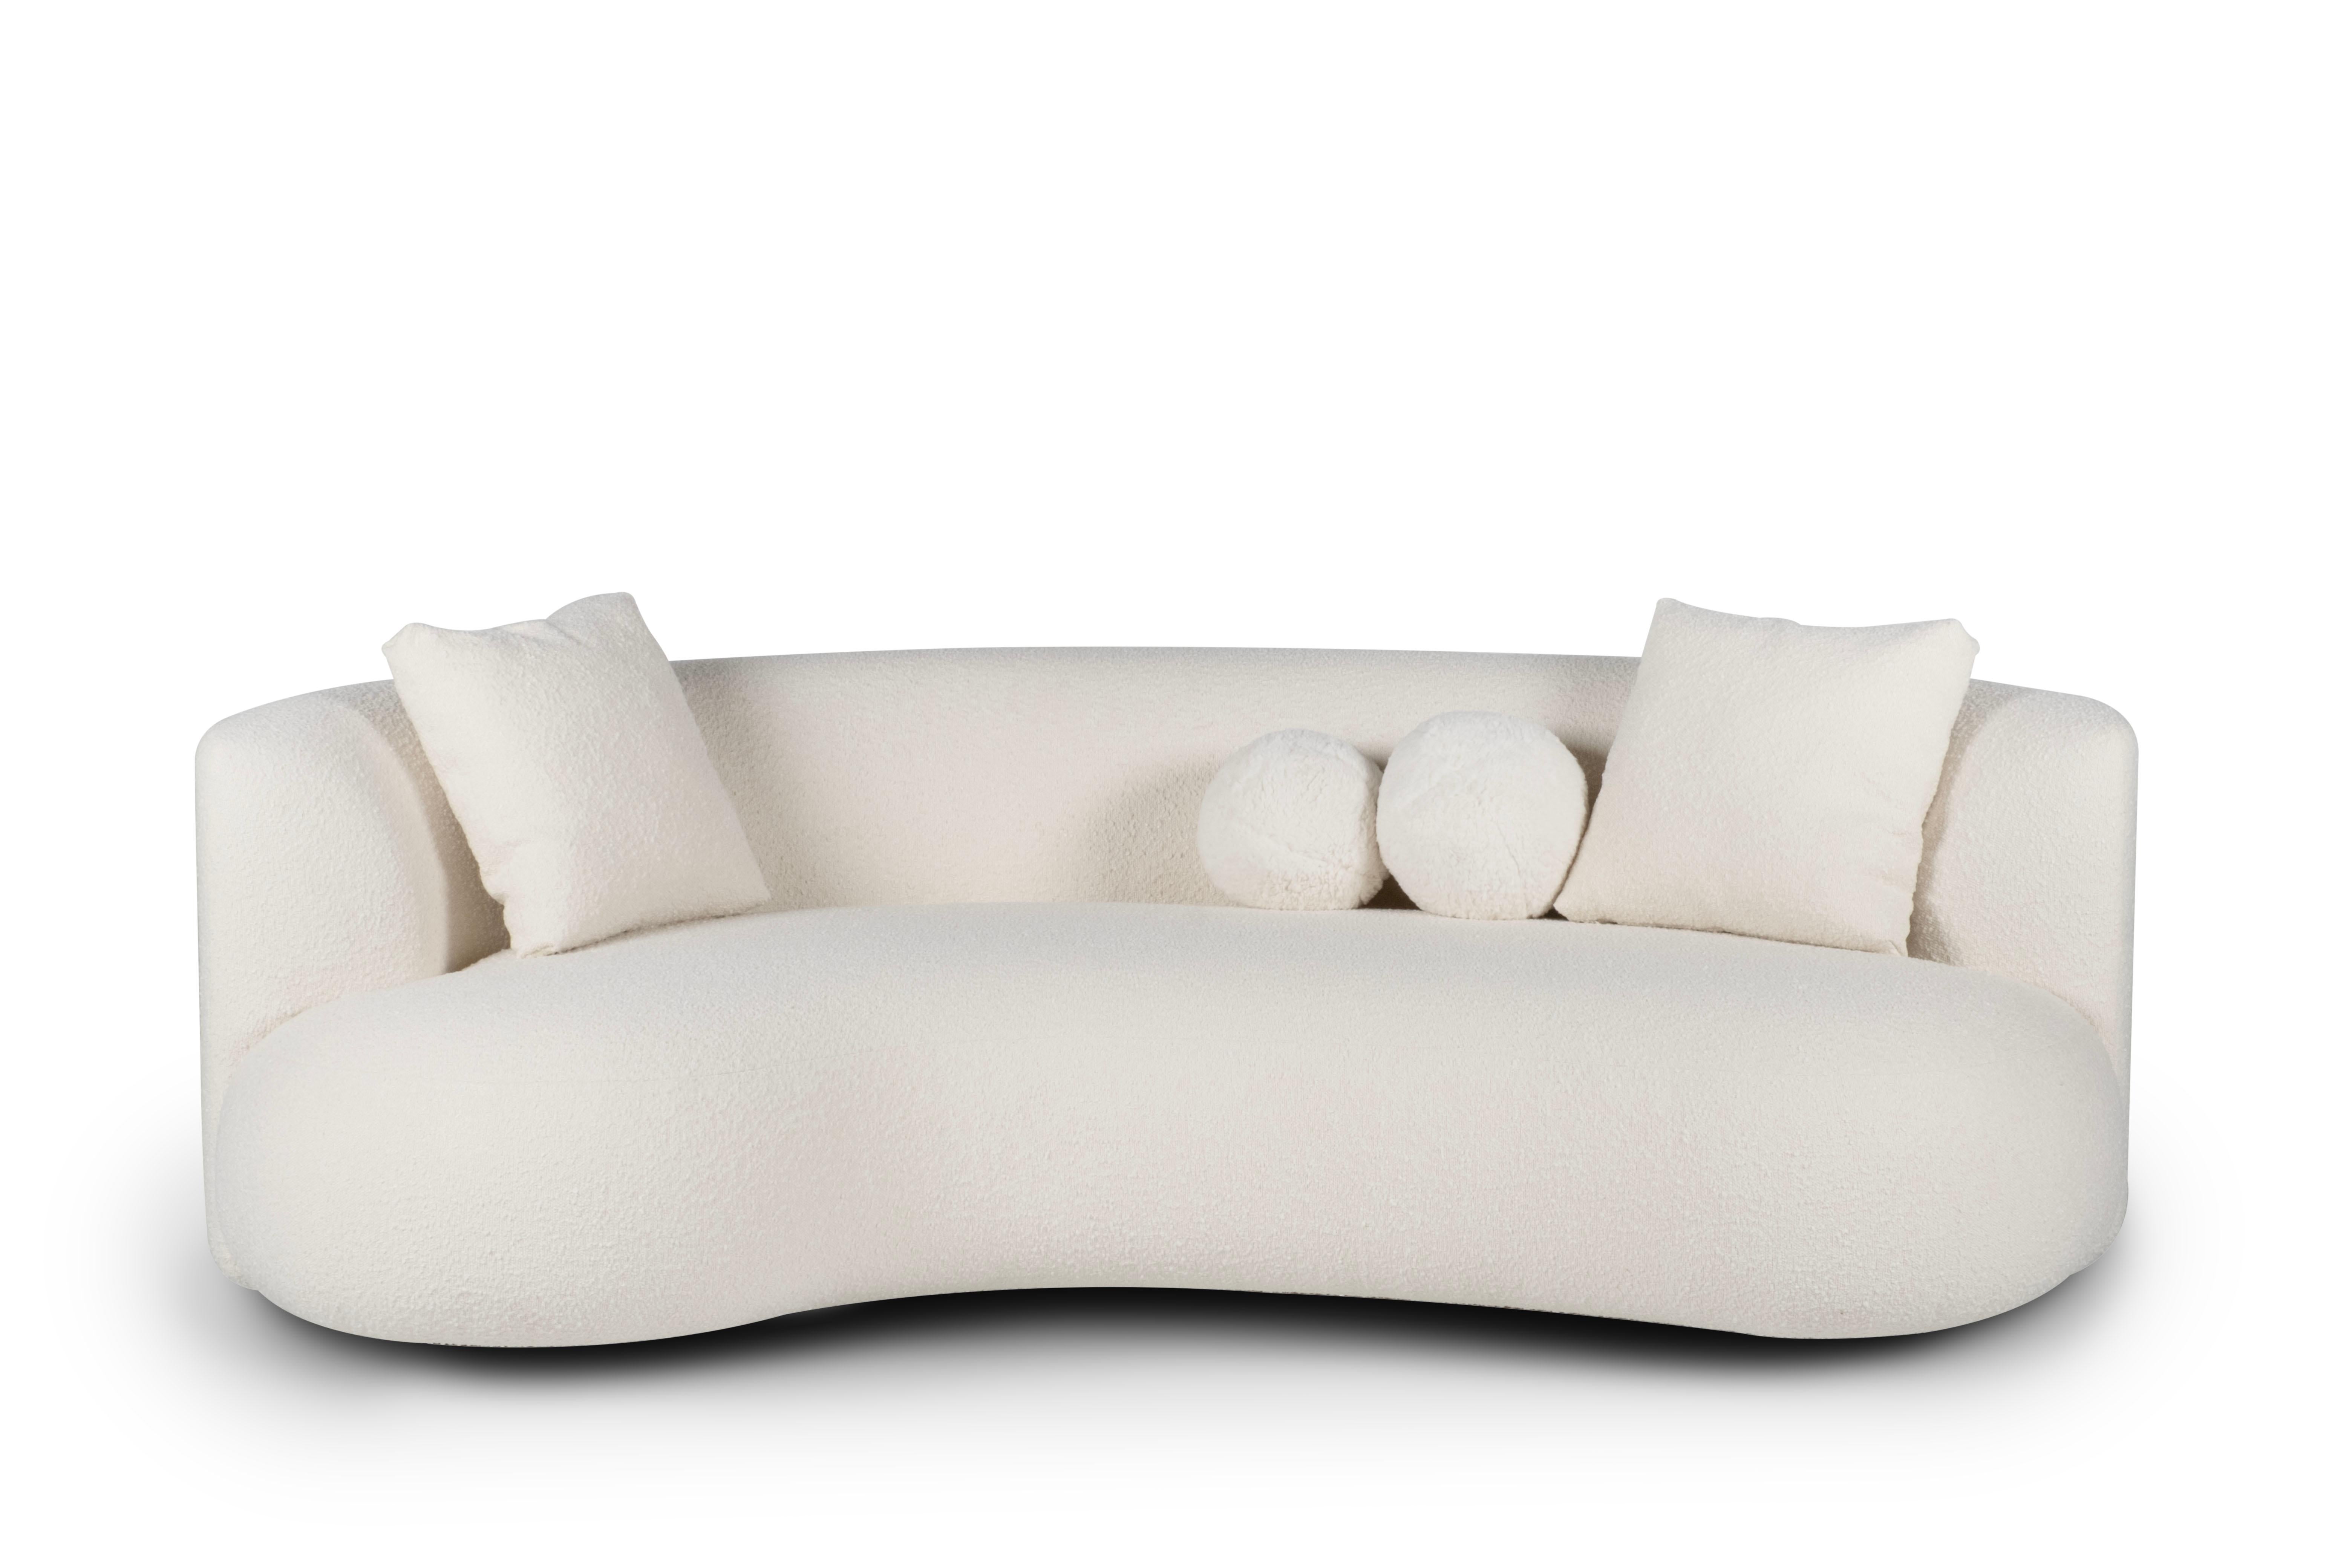 Twins sofa, Contemporary Collection, Handcrafted in Portugal - Europe by Greenapple.

Designed by Rute Martins for the Contemporary Collection, the Twins curved sofa and day bed share the same genes, yet each possesses a distinct design, creating a